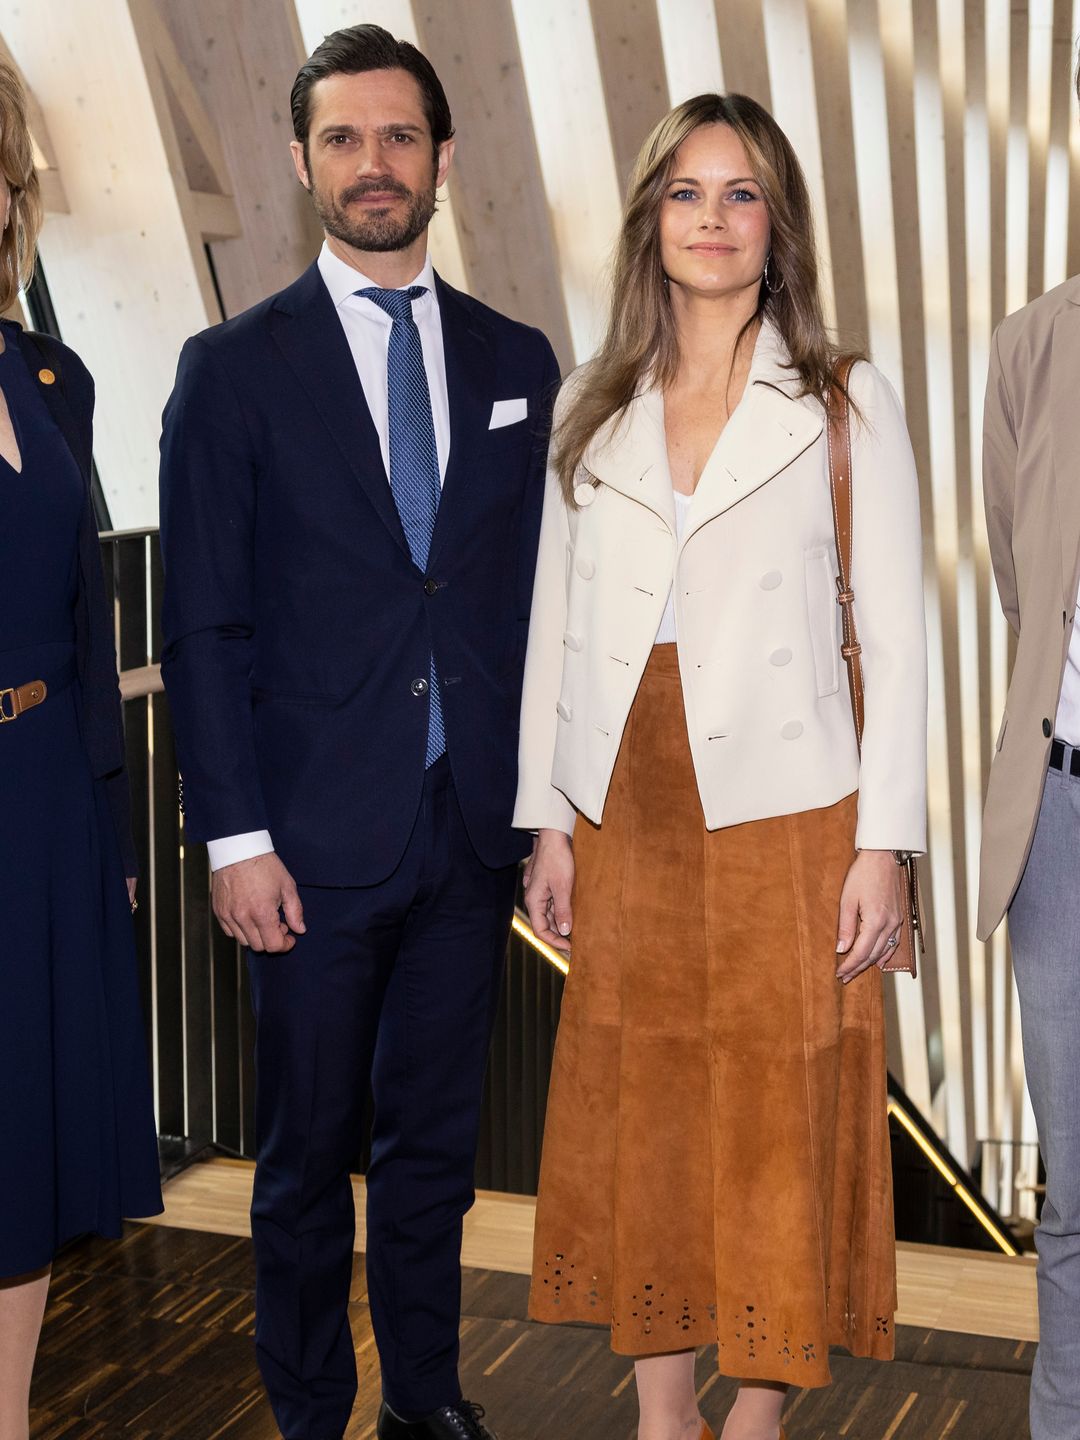 Princess Sofia and Prince Carl Philip of Sweden arrive at the Karolinska Institute to attend a seminar on "Research In Neuropsychiatric Disabilities" on April 25, 2023